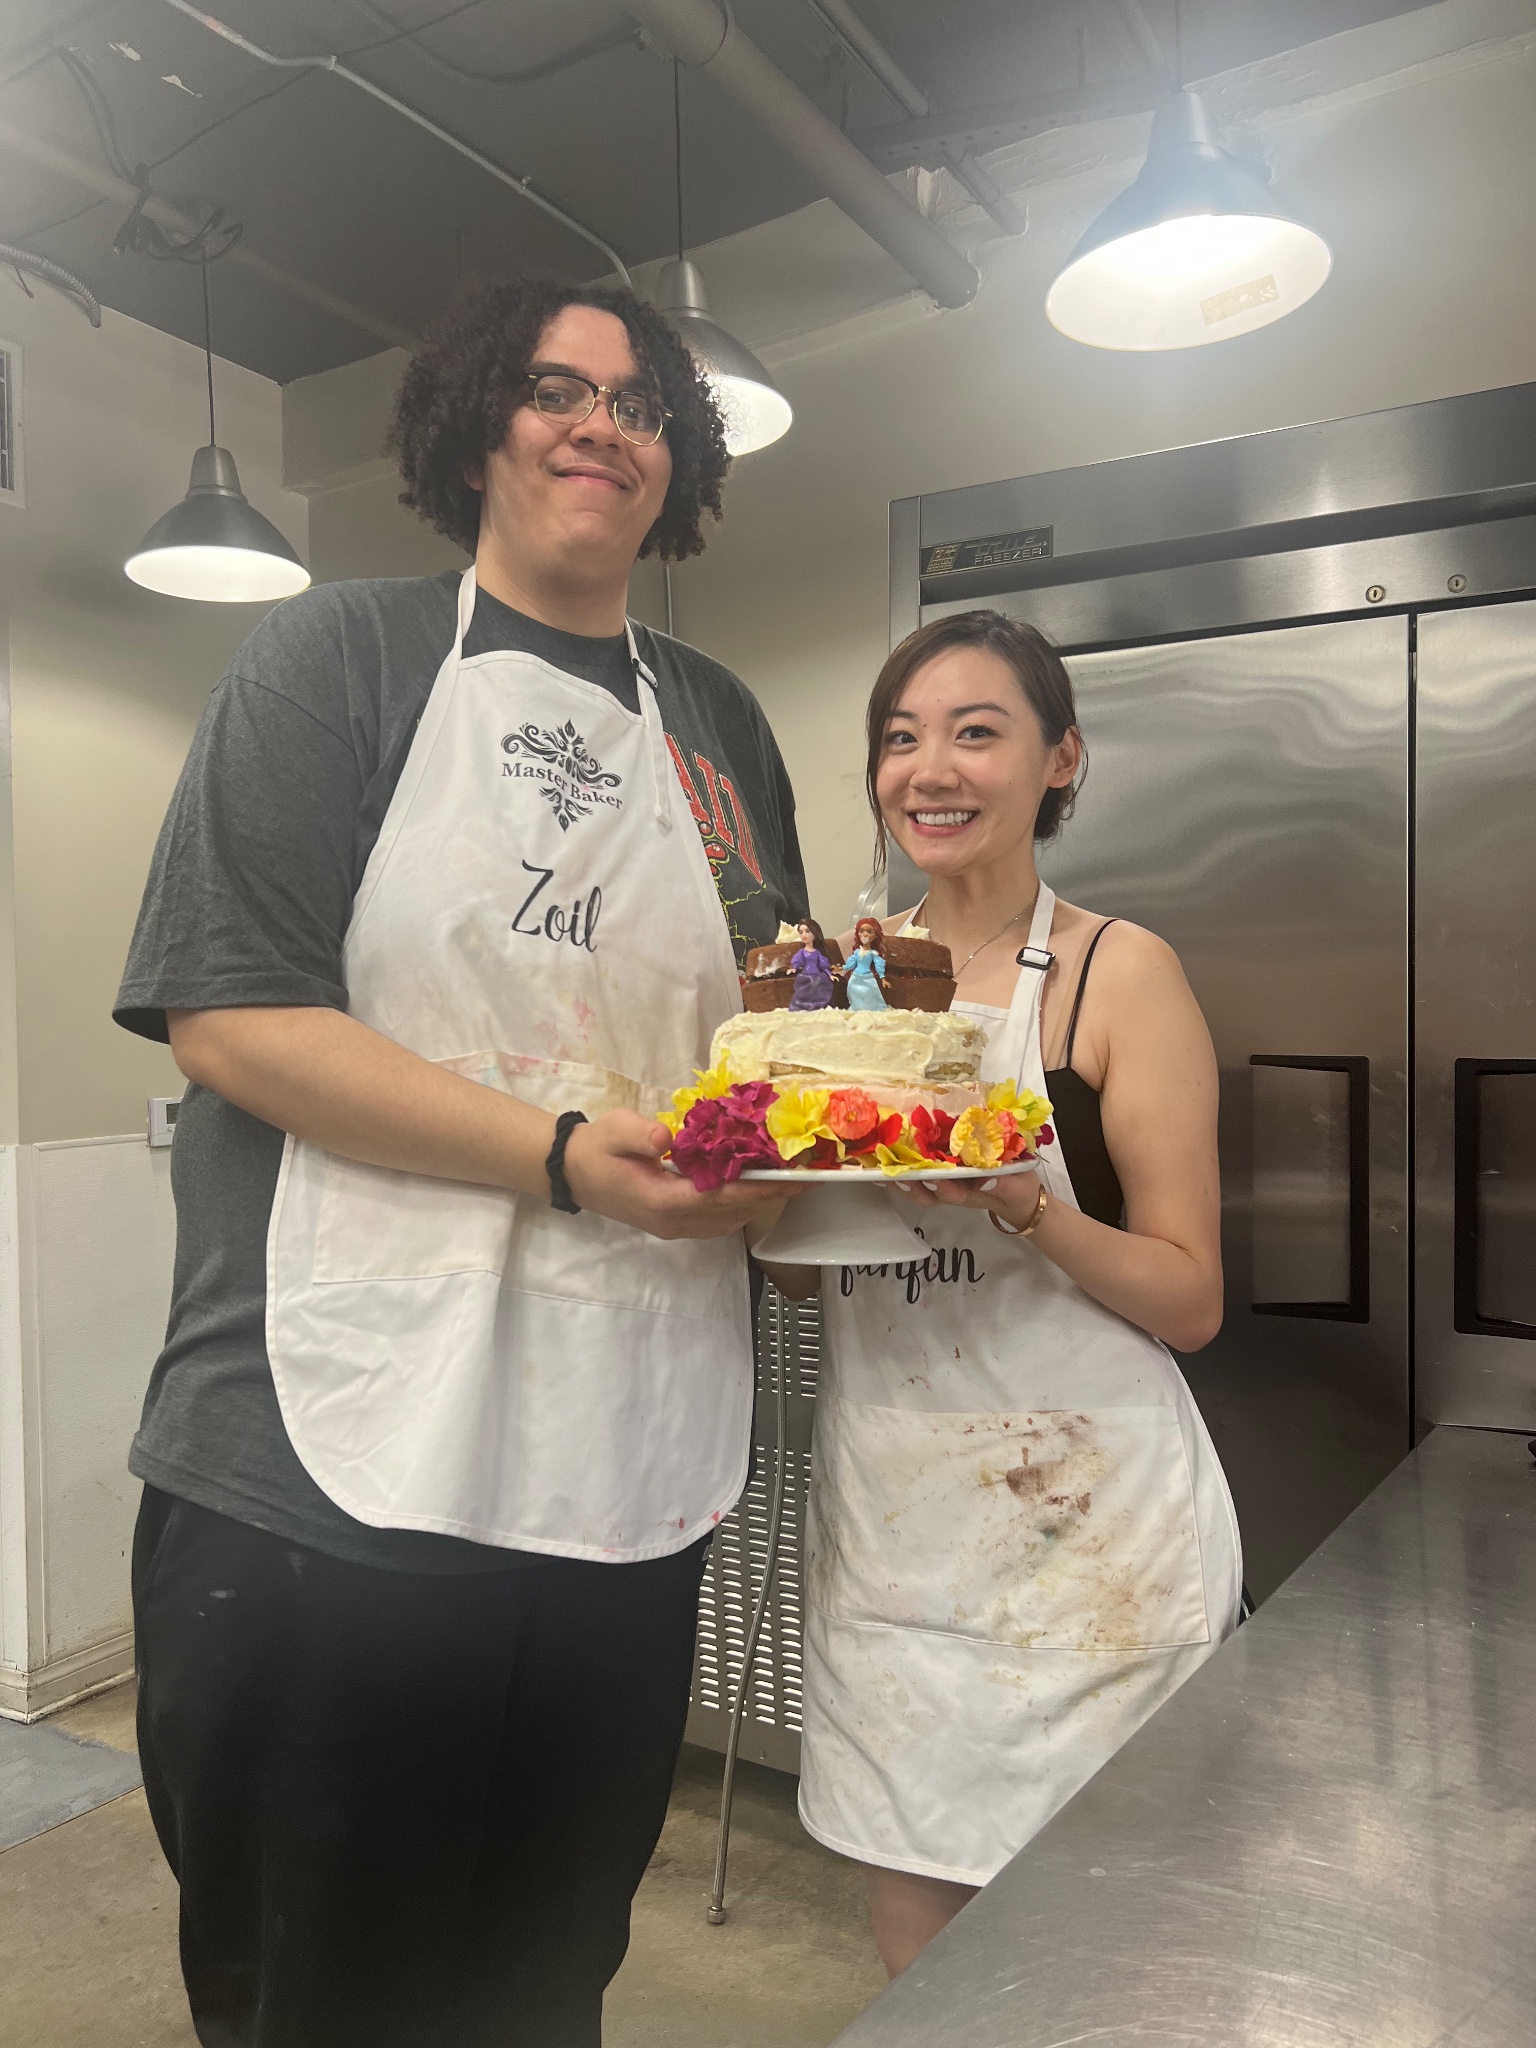 From Date to Contestants: Everything to Know About QTCinderella's Master  Baker Twitch Show - EssentiallySports